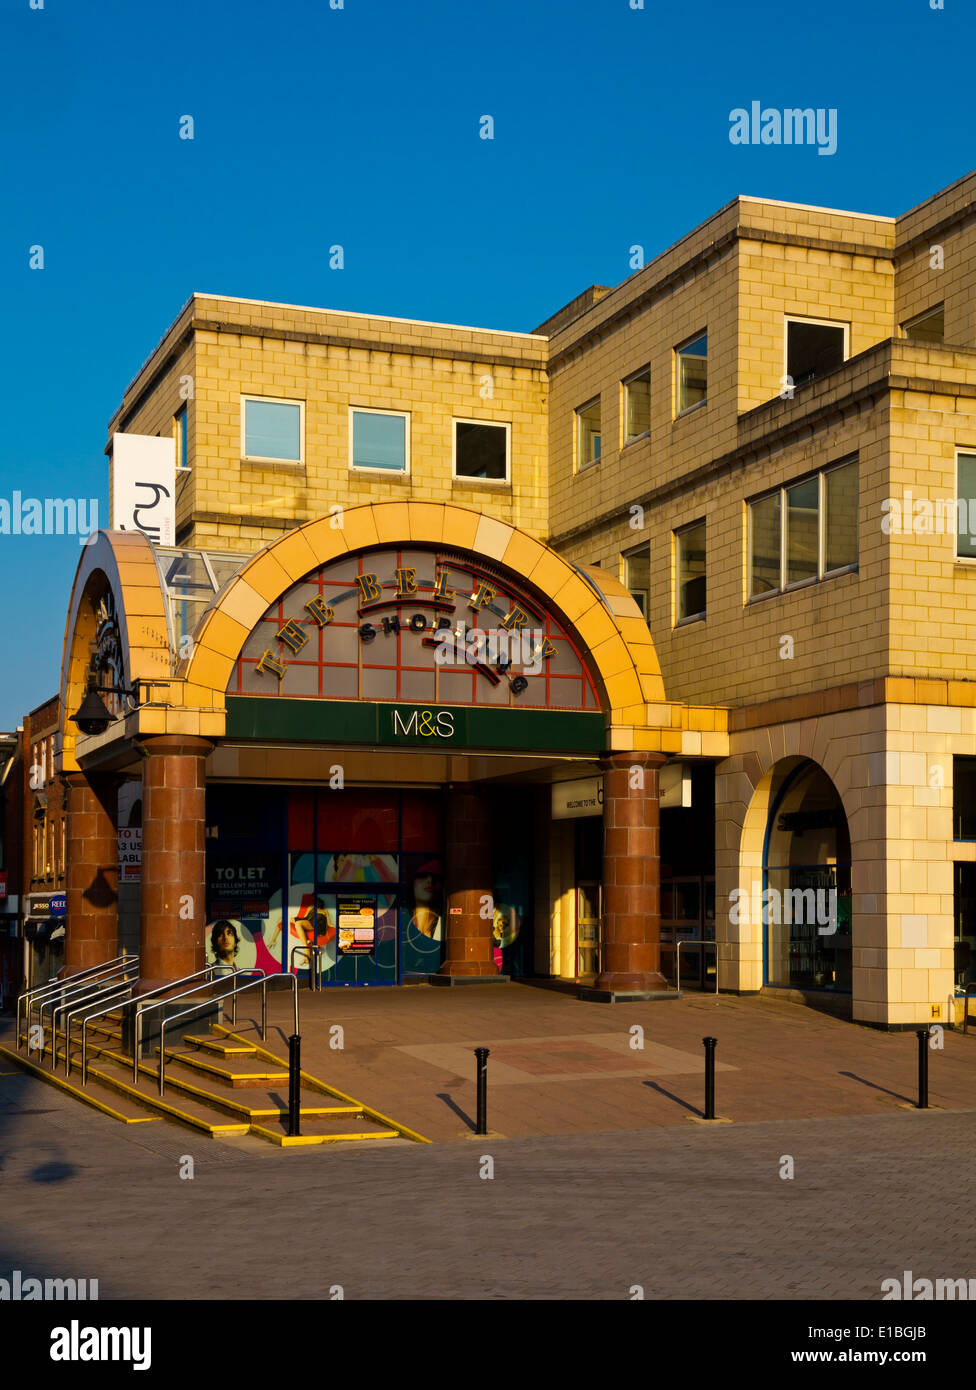 The Belfry Shopping Centre in Redhill Surrey England UK a pedestrianised area on the High Street with M&S in front of building Stock Photo